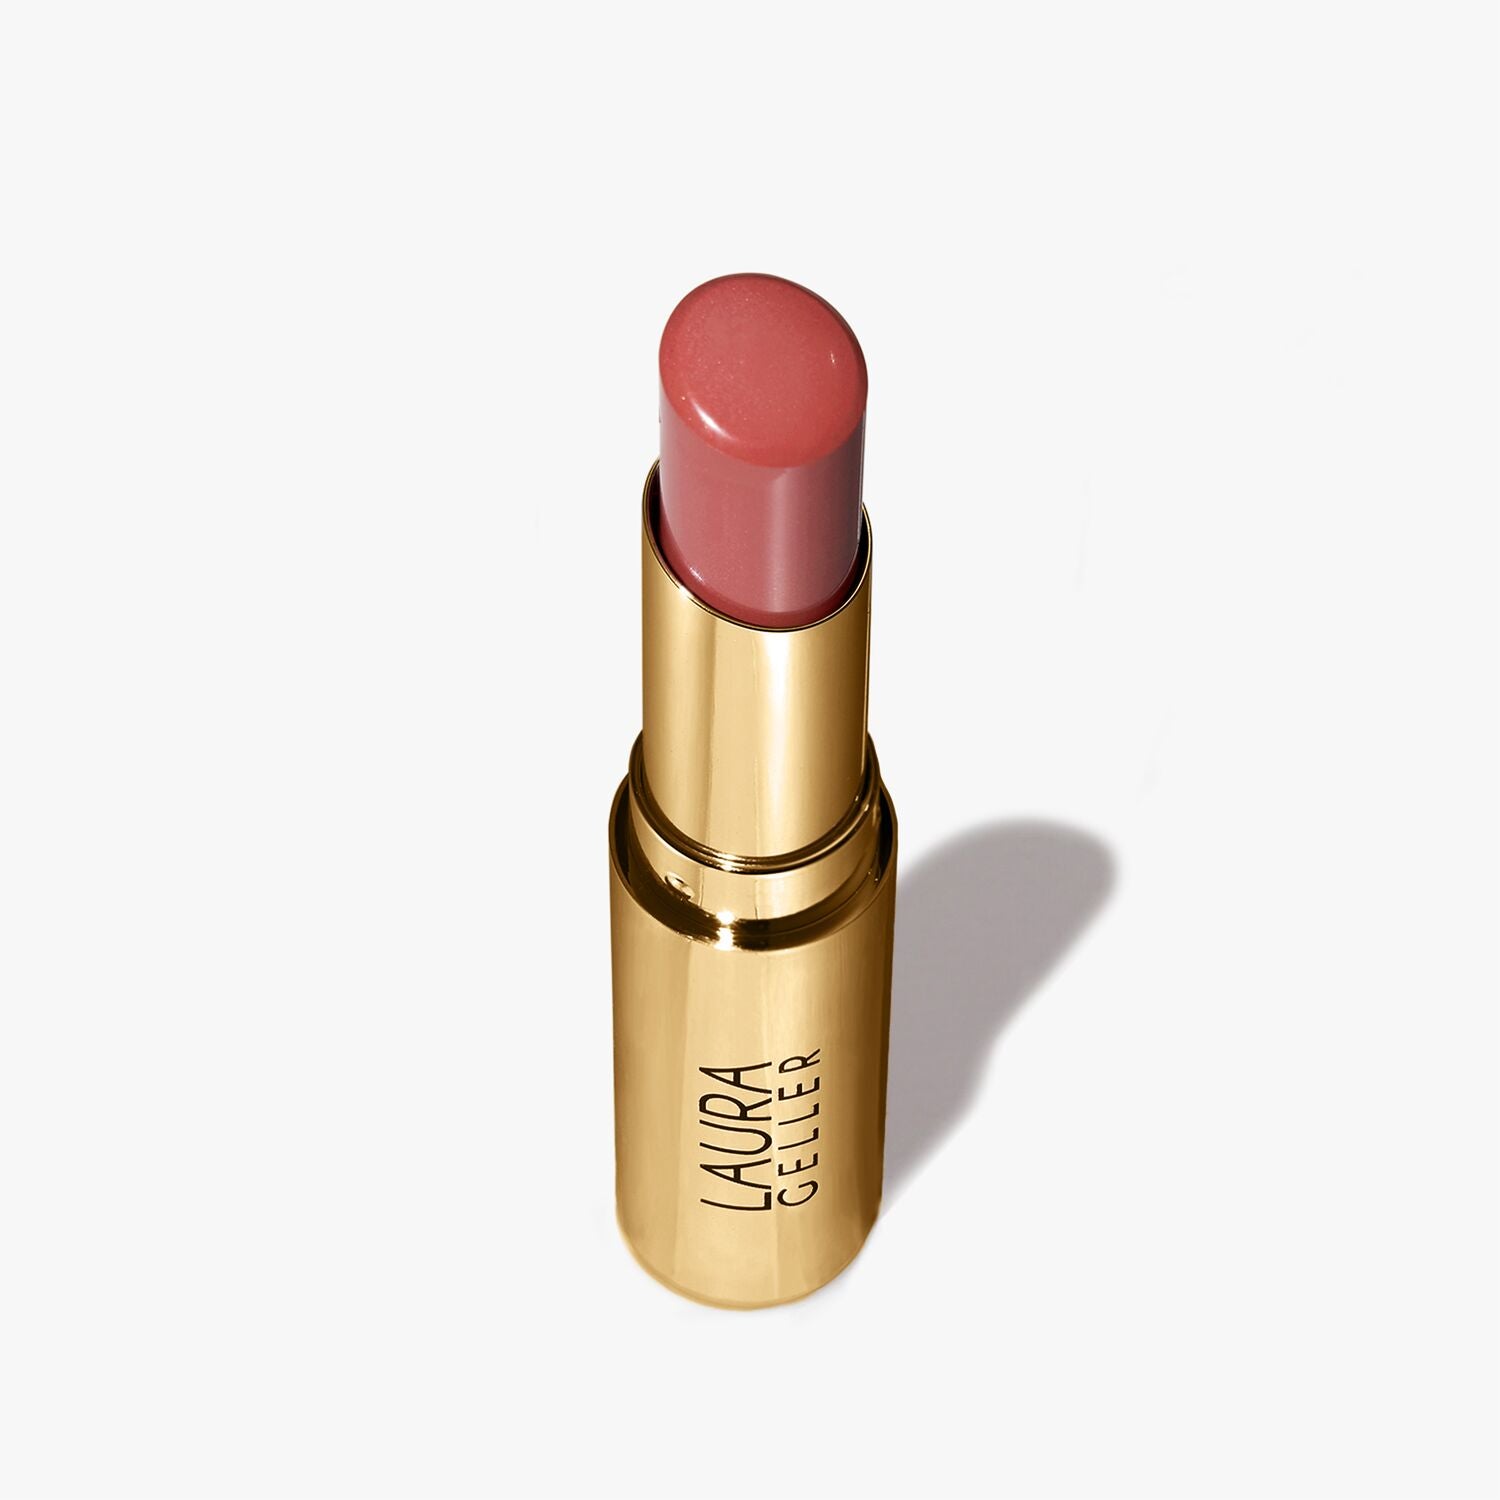 Laura Geller Jelly Balm Hydrating Lip Color in Just Peachy